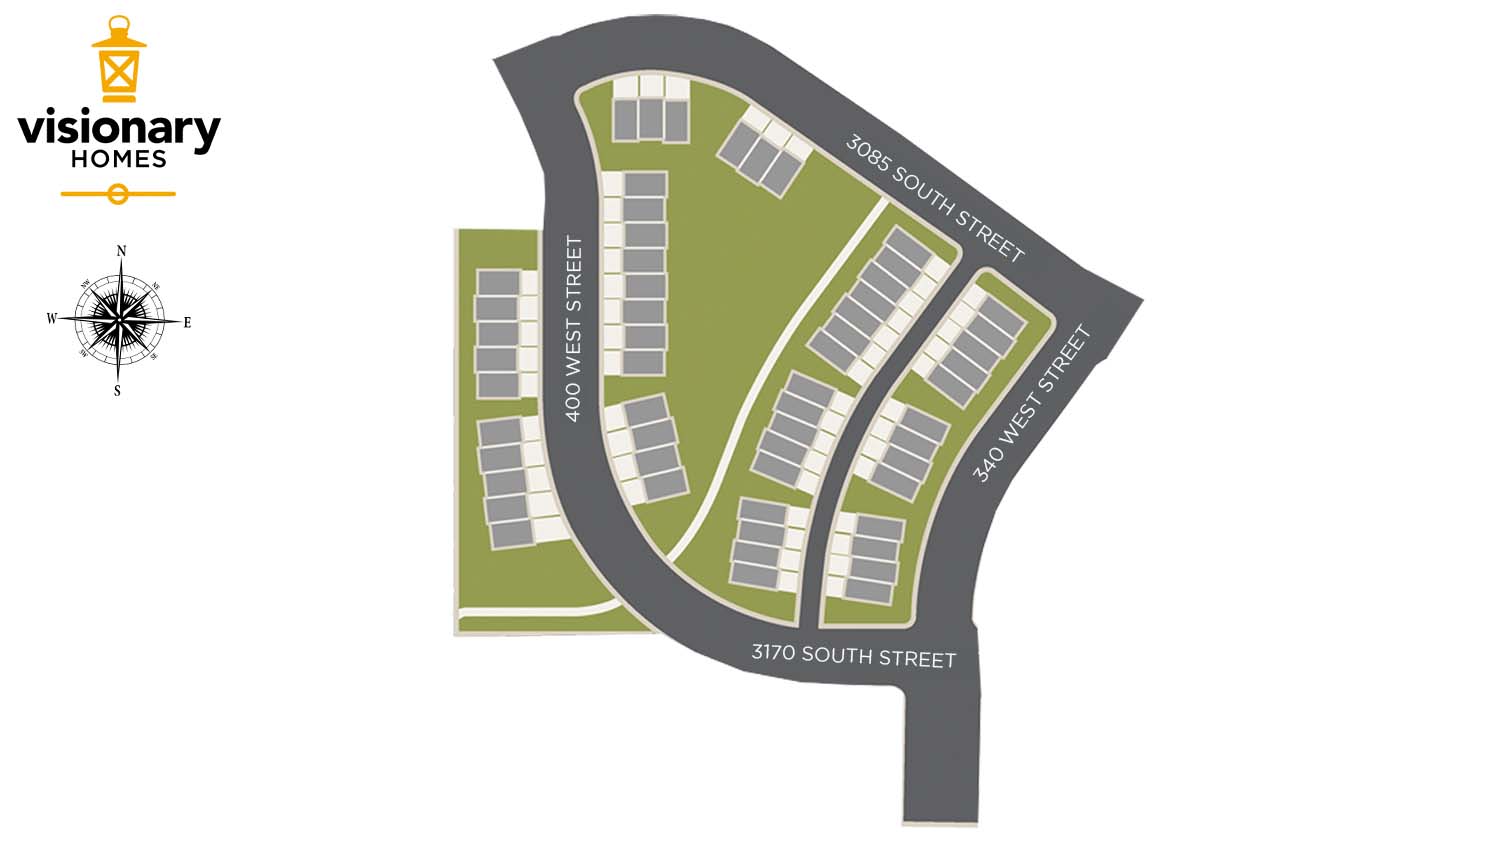 Nibley, UT Ridgeline Park TH New Homes from Visionary Homes